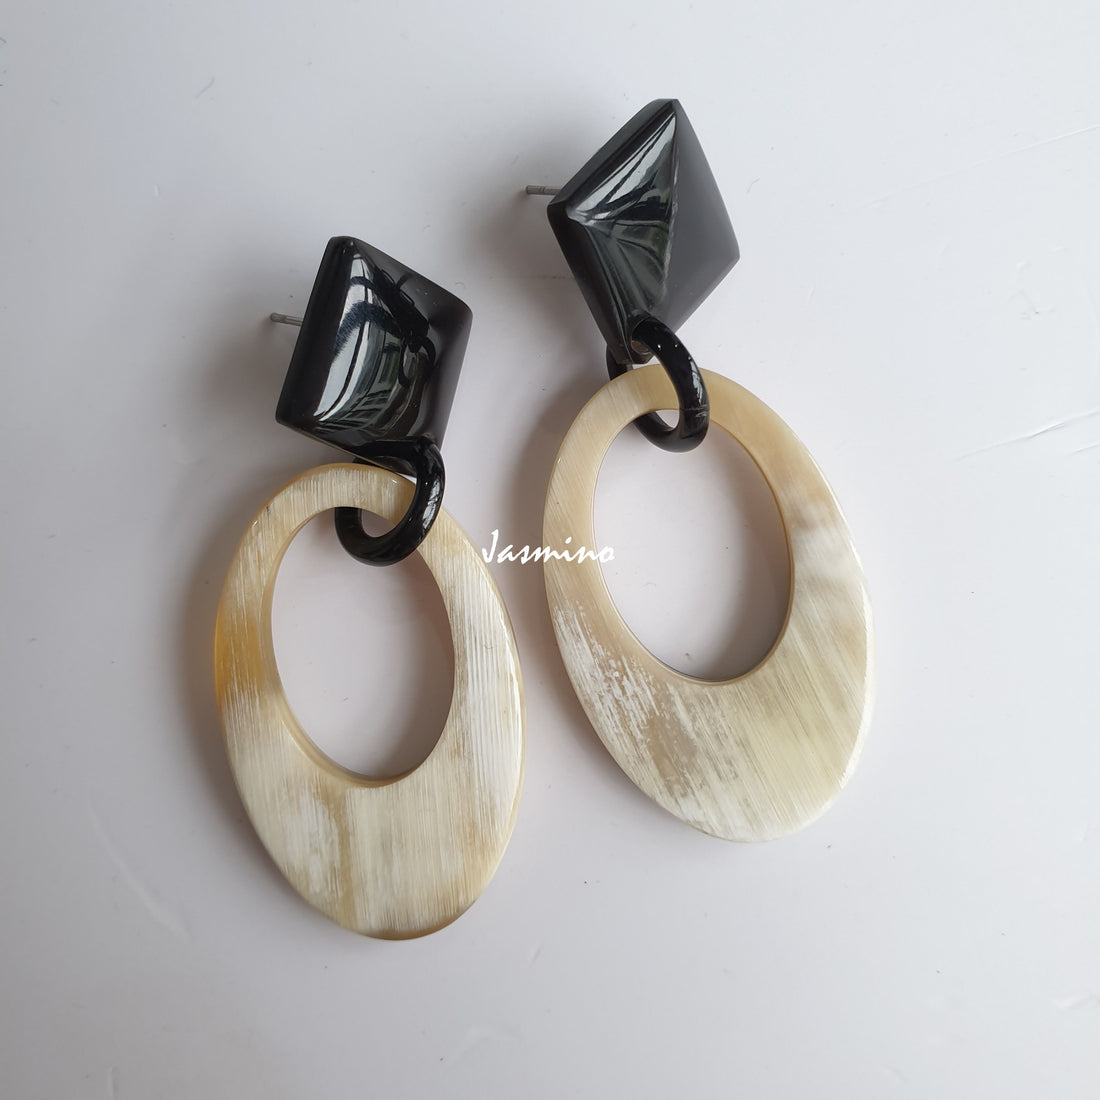 Handmade oval earrings feature white color and natural buffalo horn in the natural light